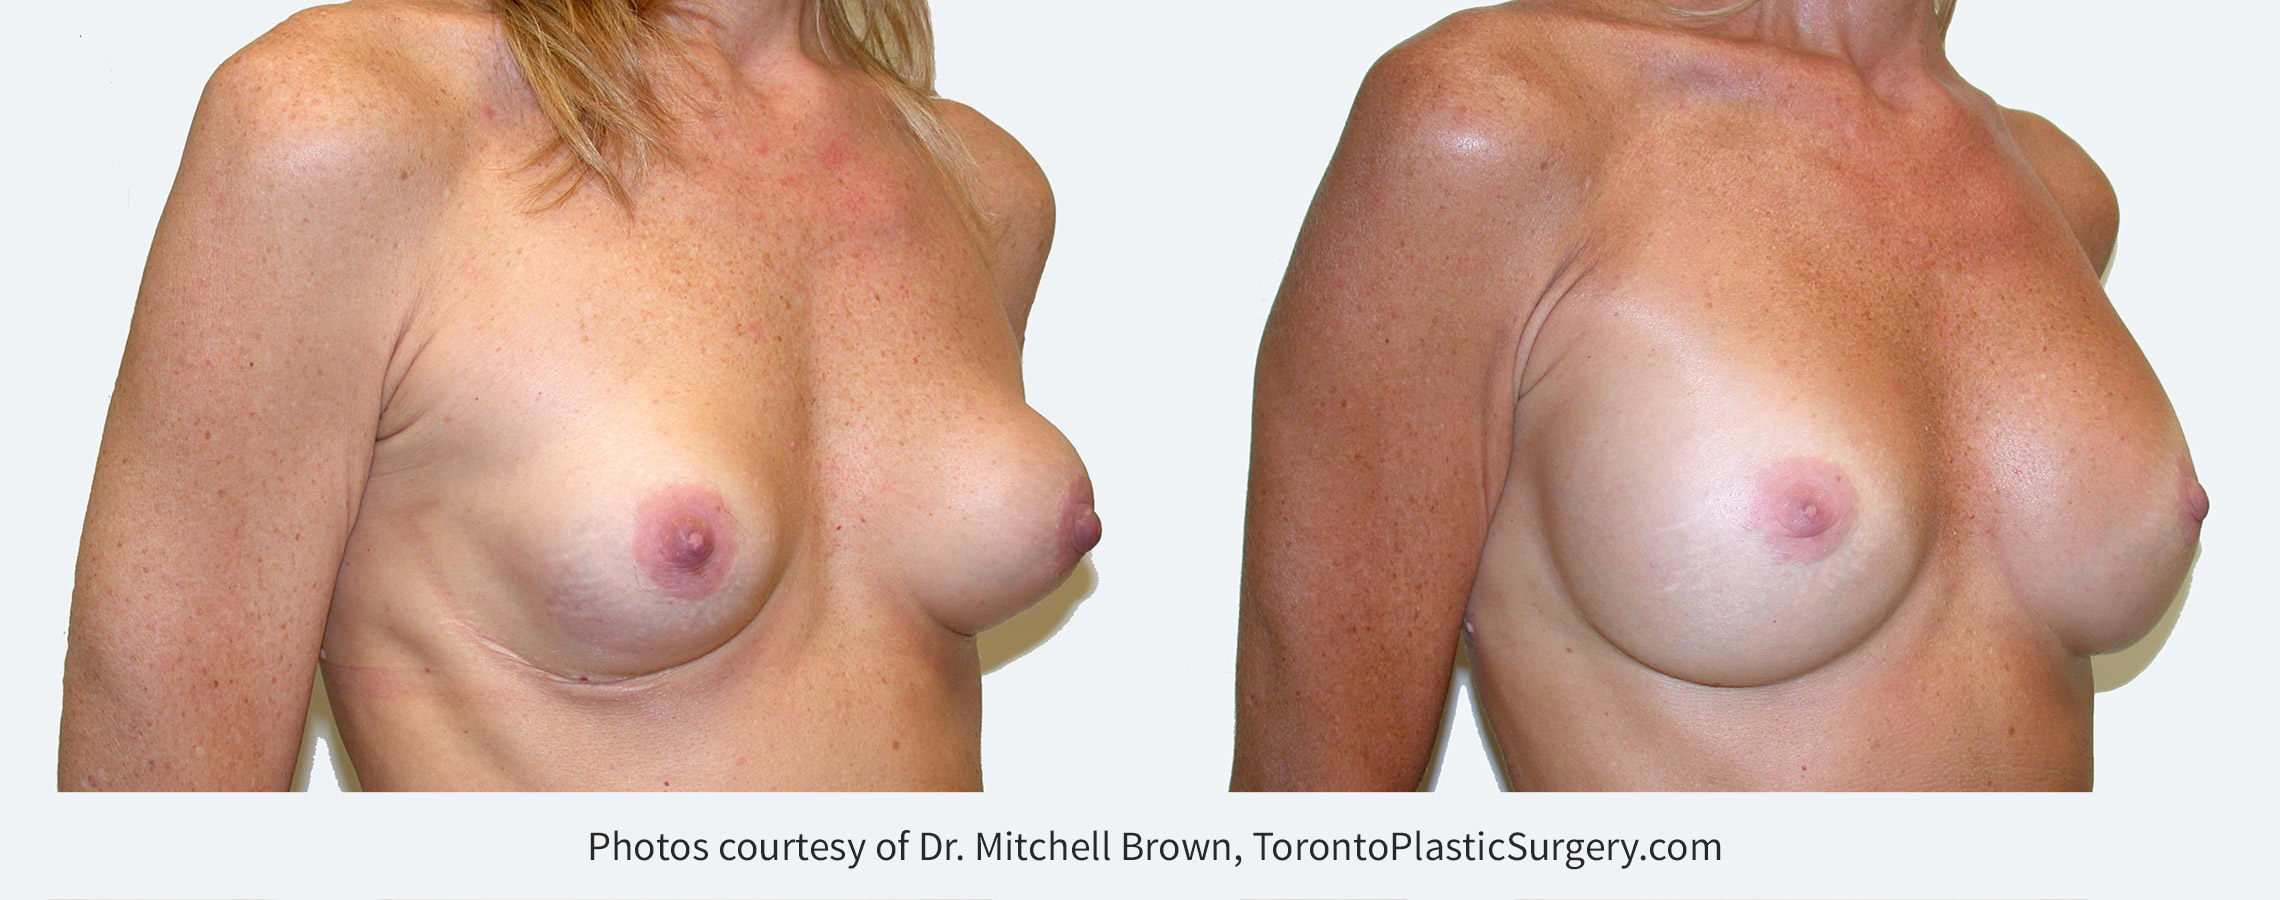 Capsular contracture (scar tissue around implants) corrected with implant removal, scar tissue removal and placement of new 275 cc silicone gel breast implants under the pectoral muscle